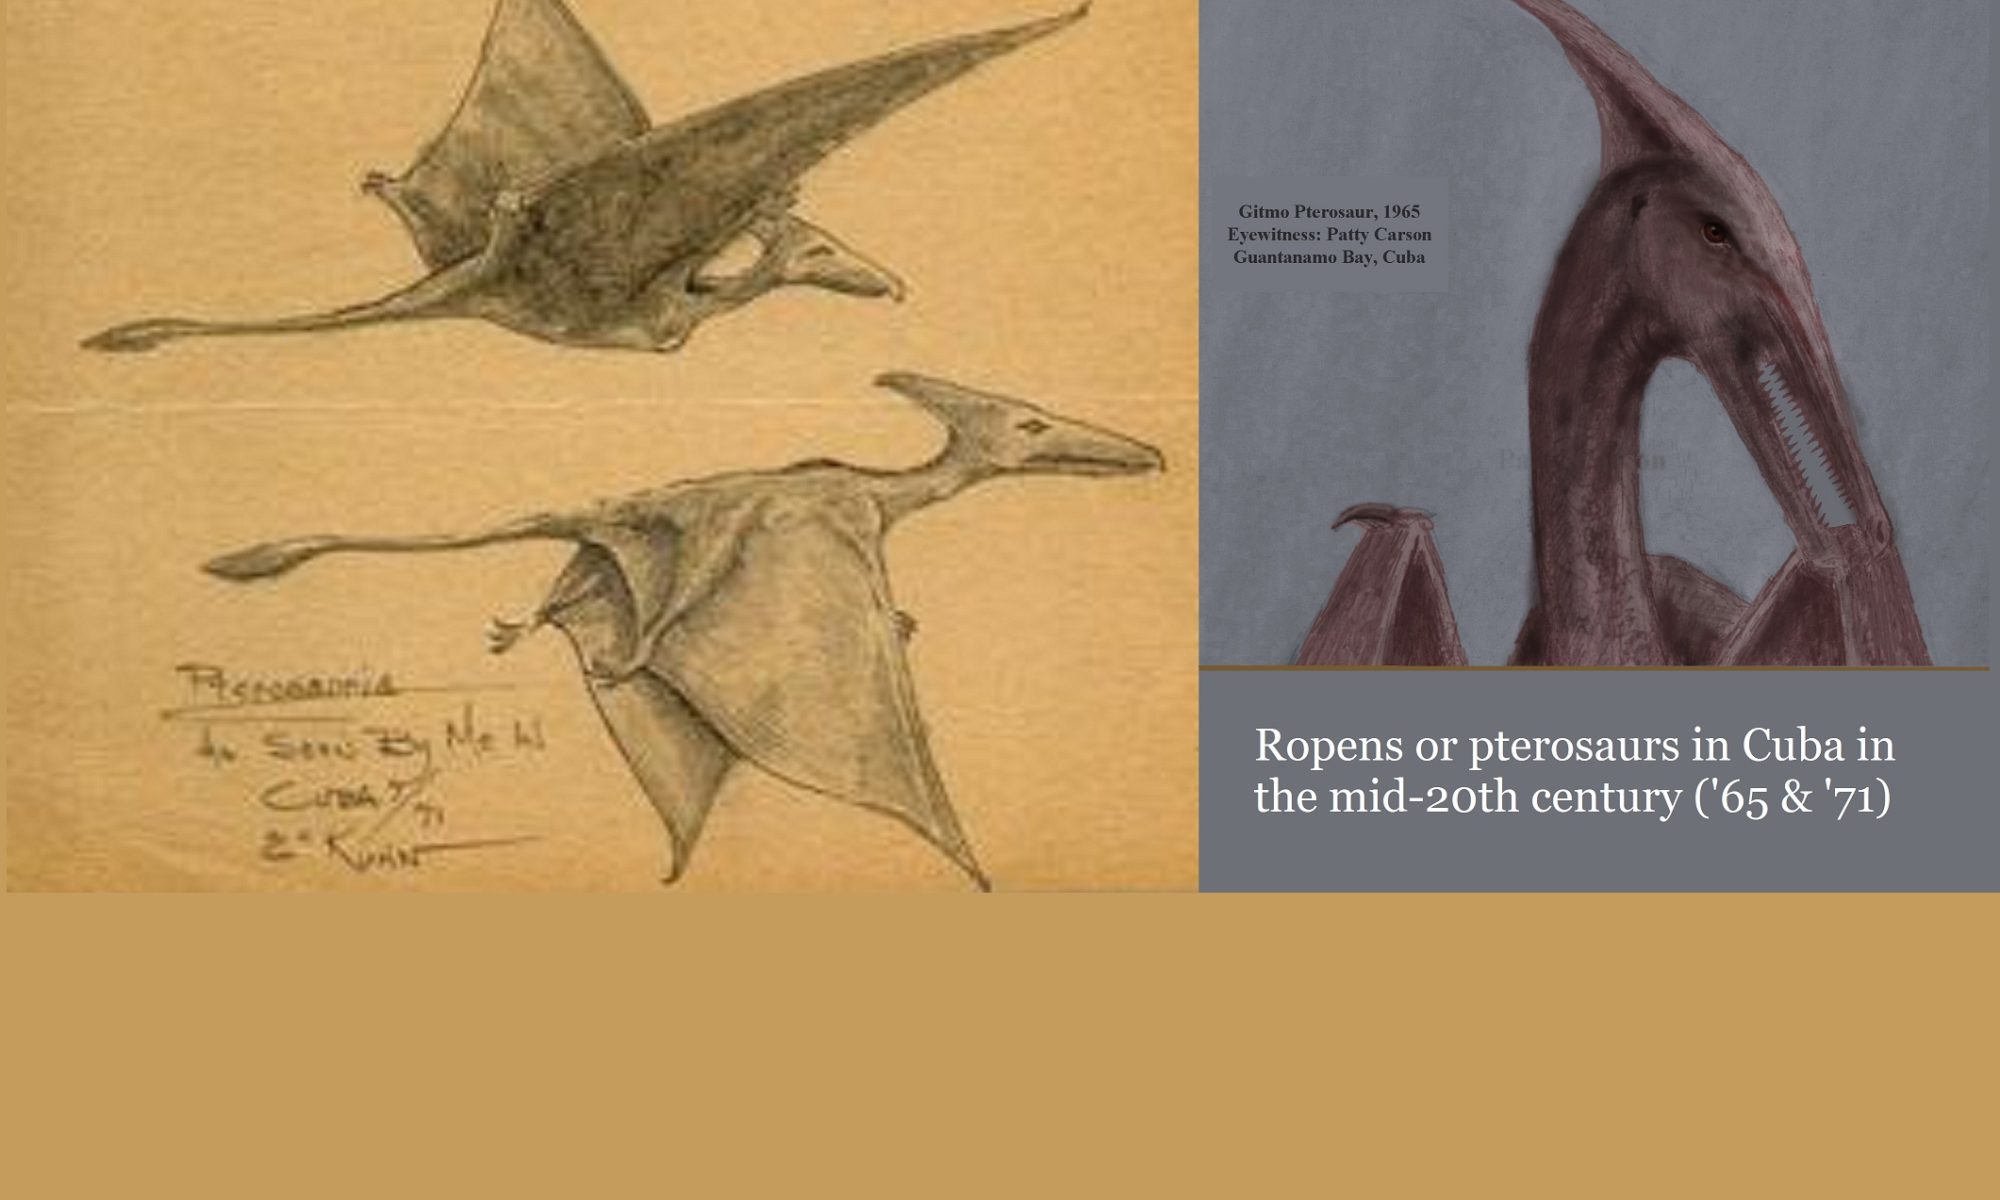 ropens or living pterosaurs seen in Cuba